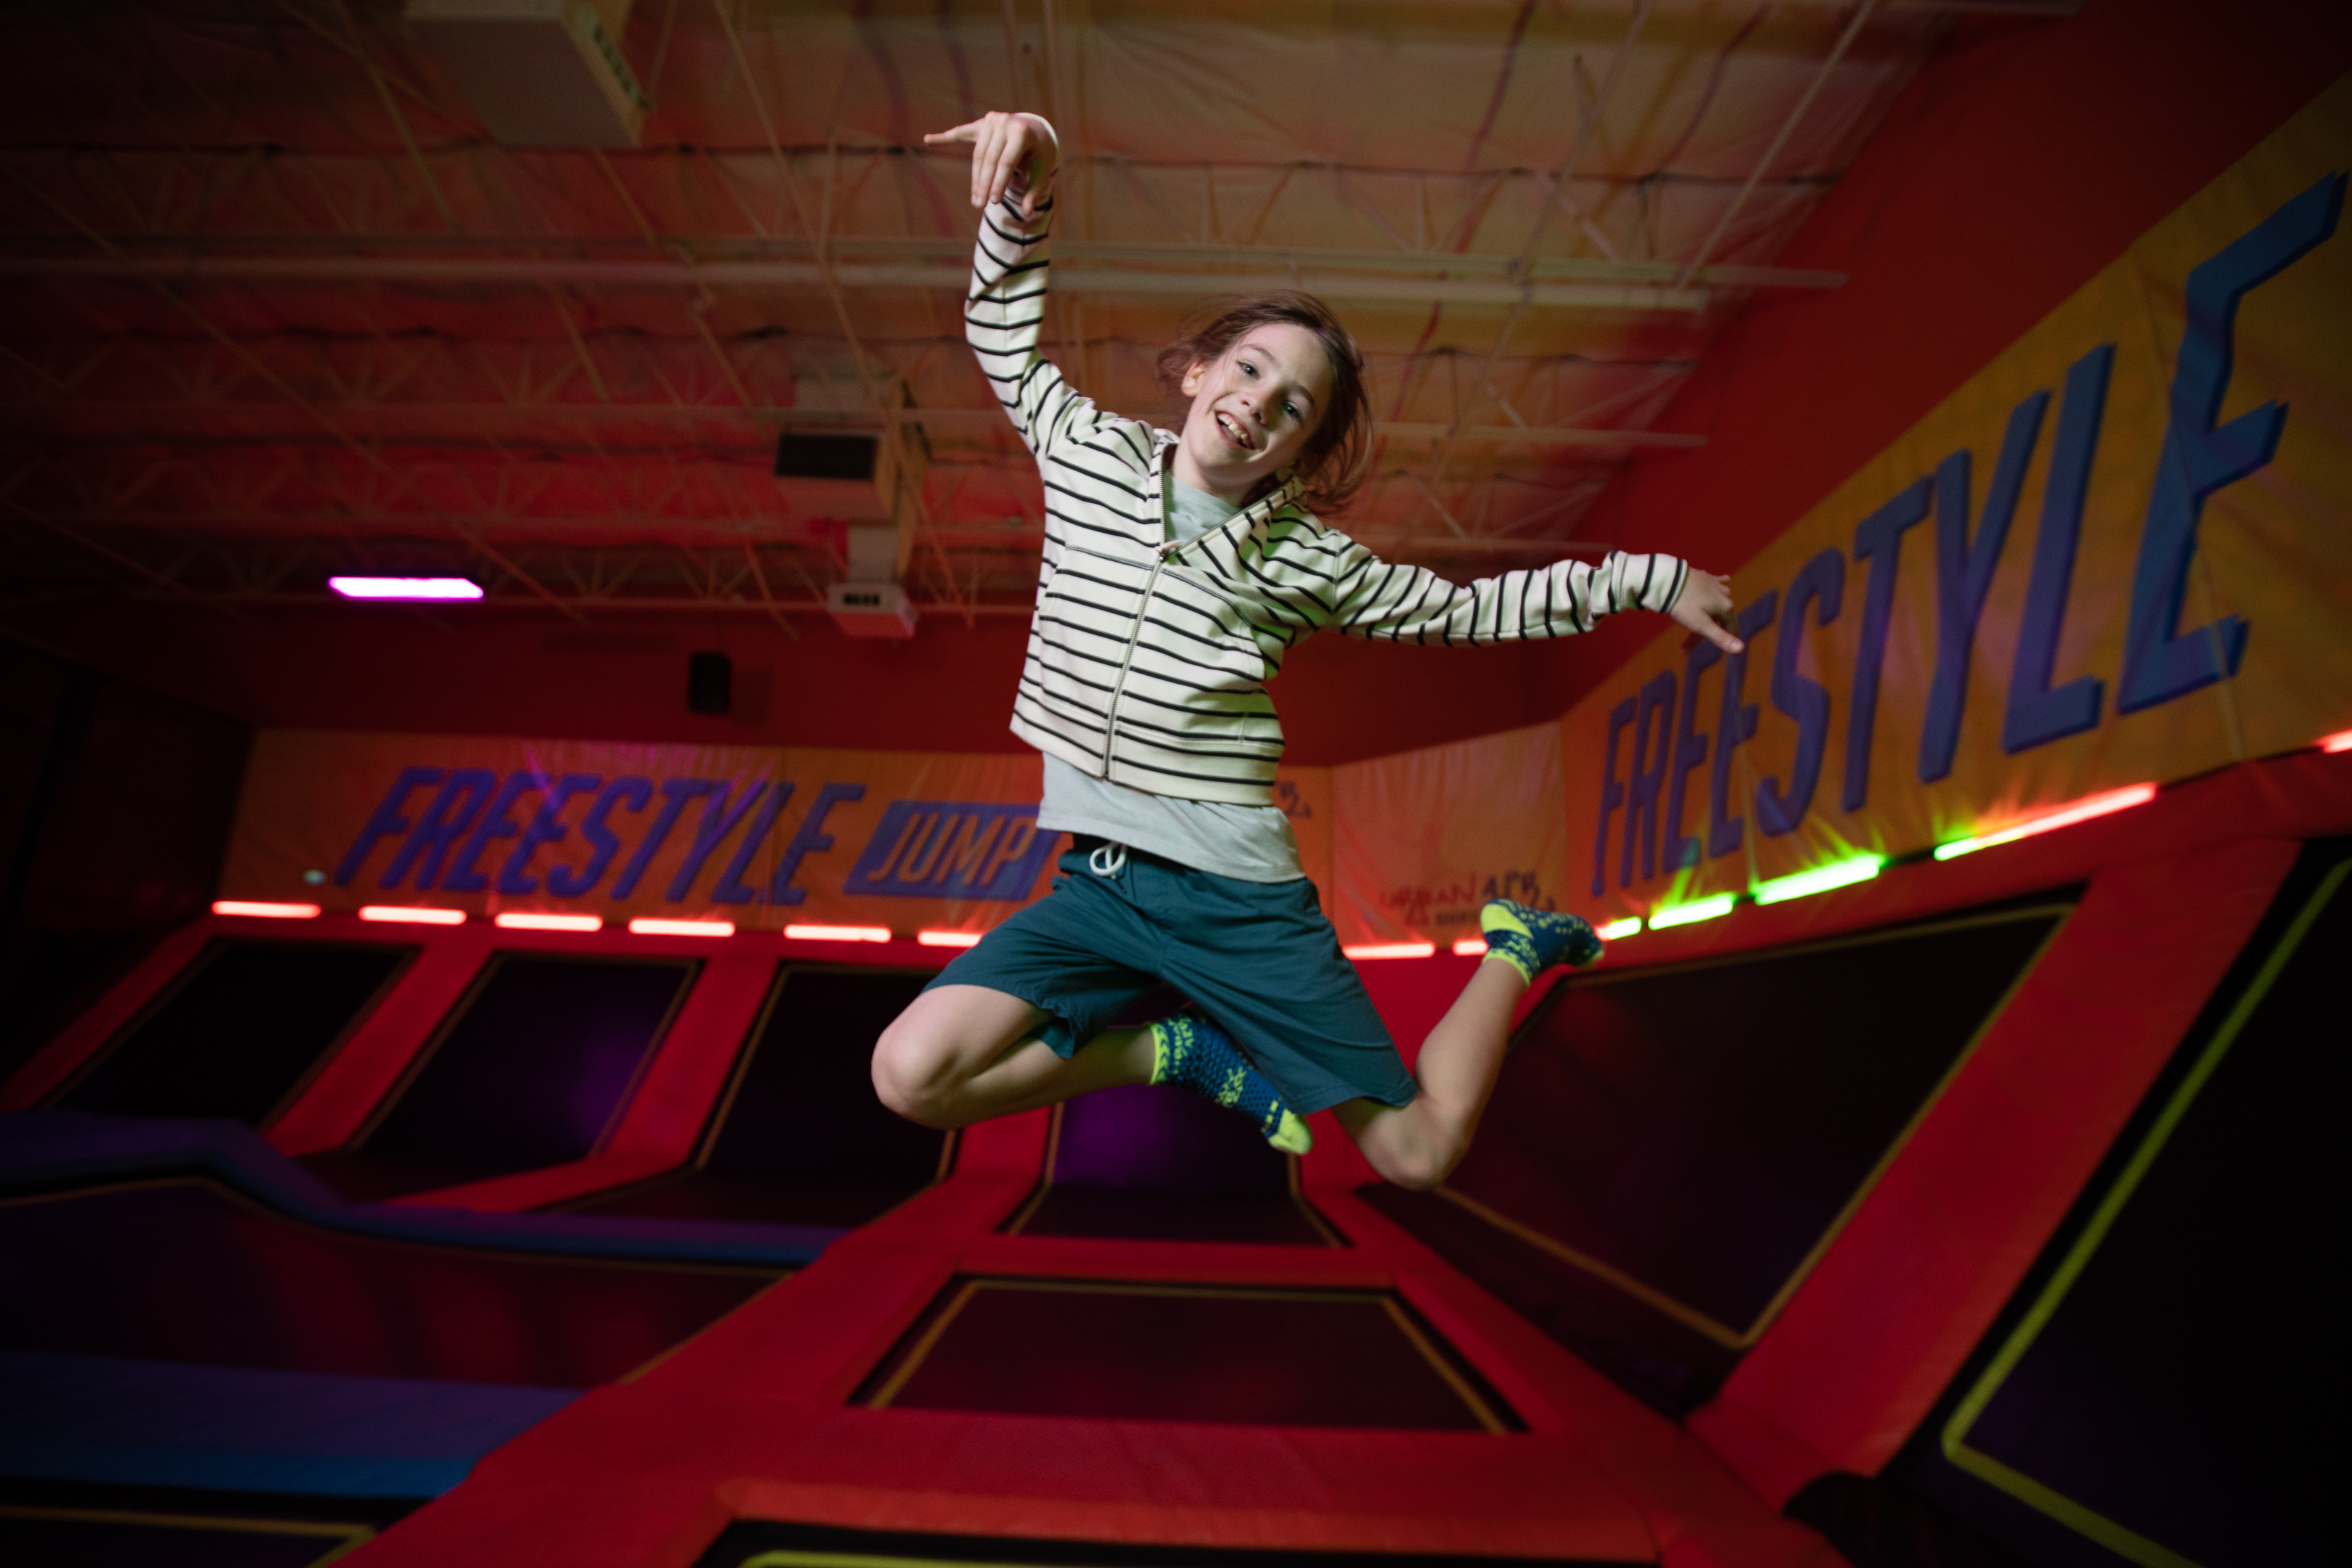 A girl jumps on an Urban Air trampoline. This is a fun idea for a 9 Year Old Birthday